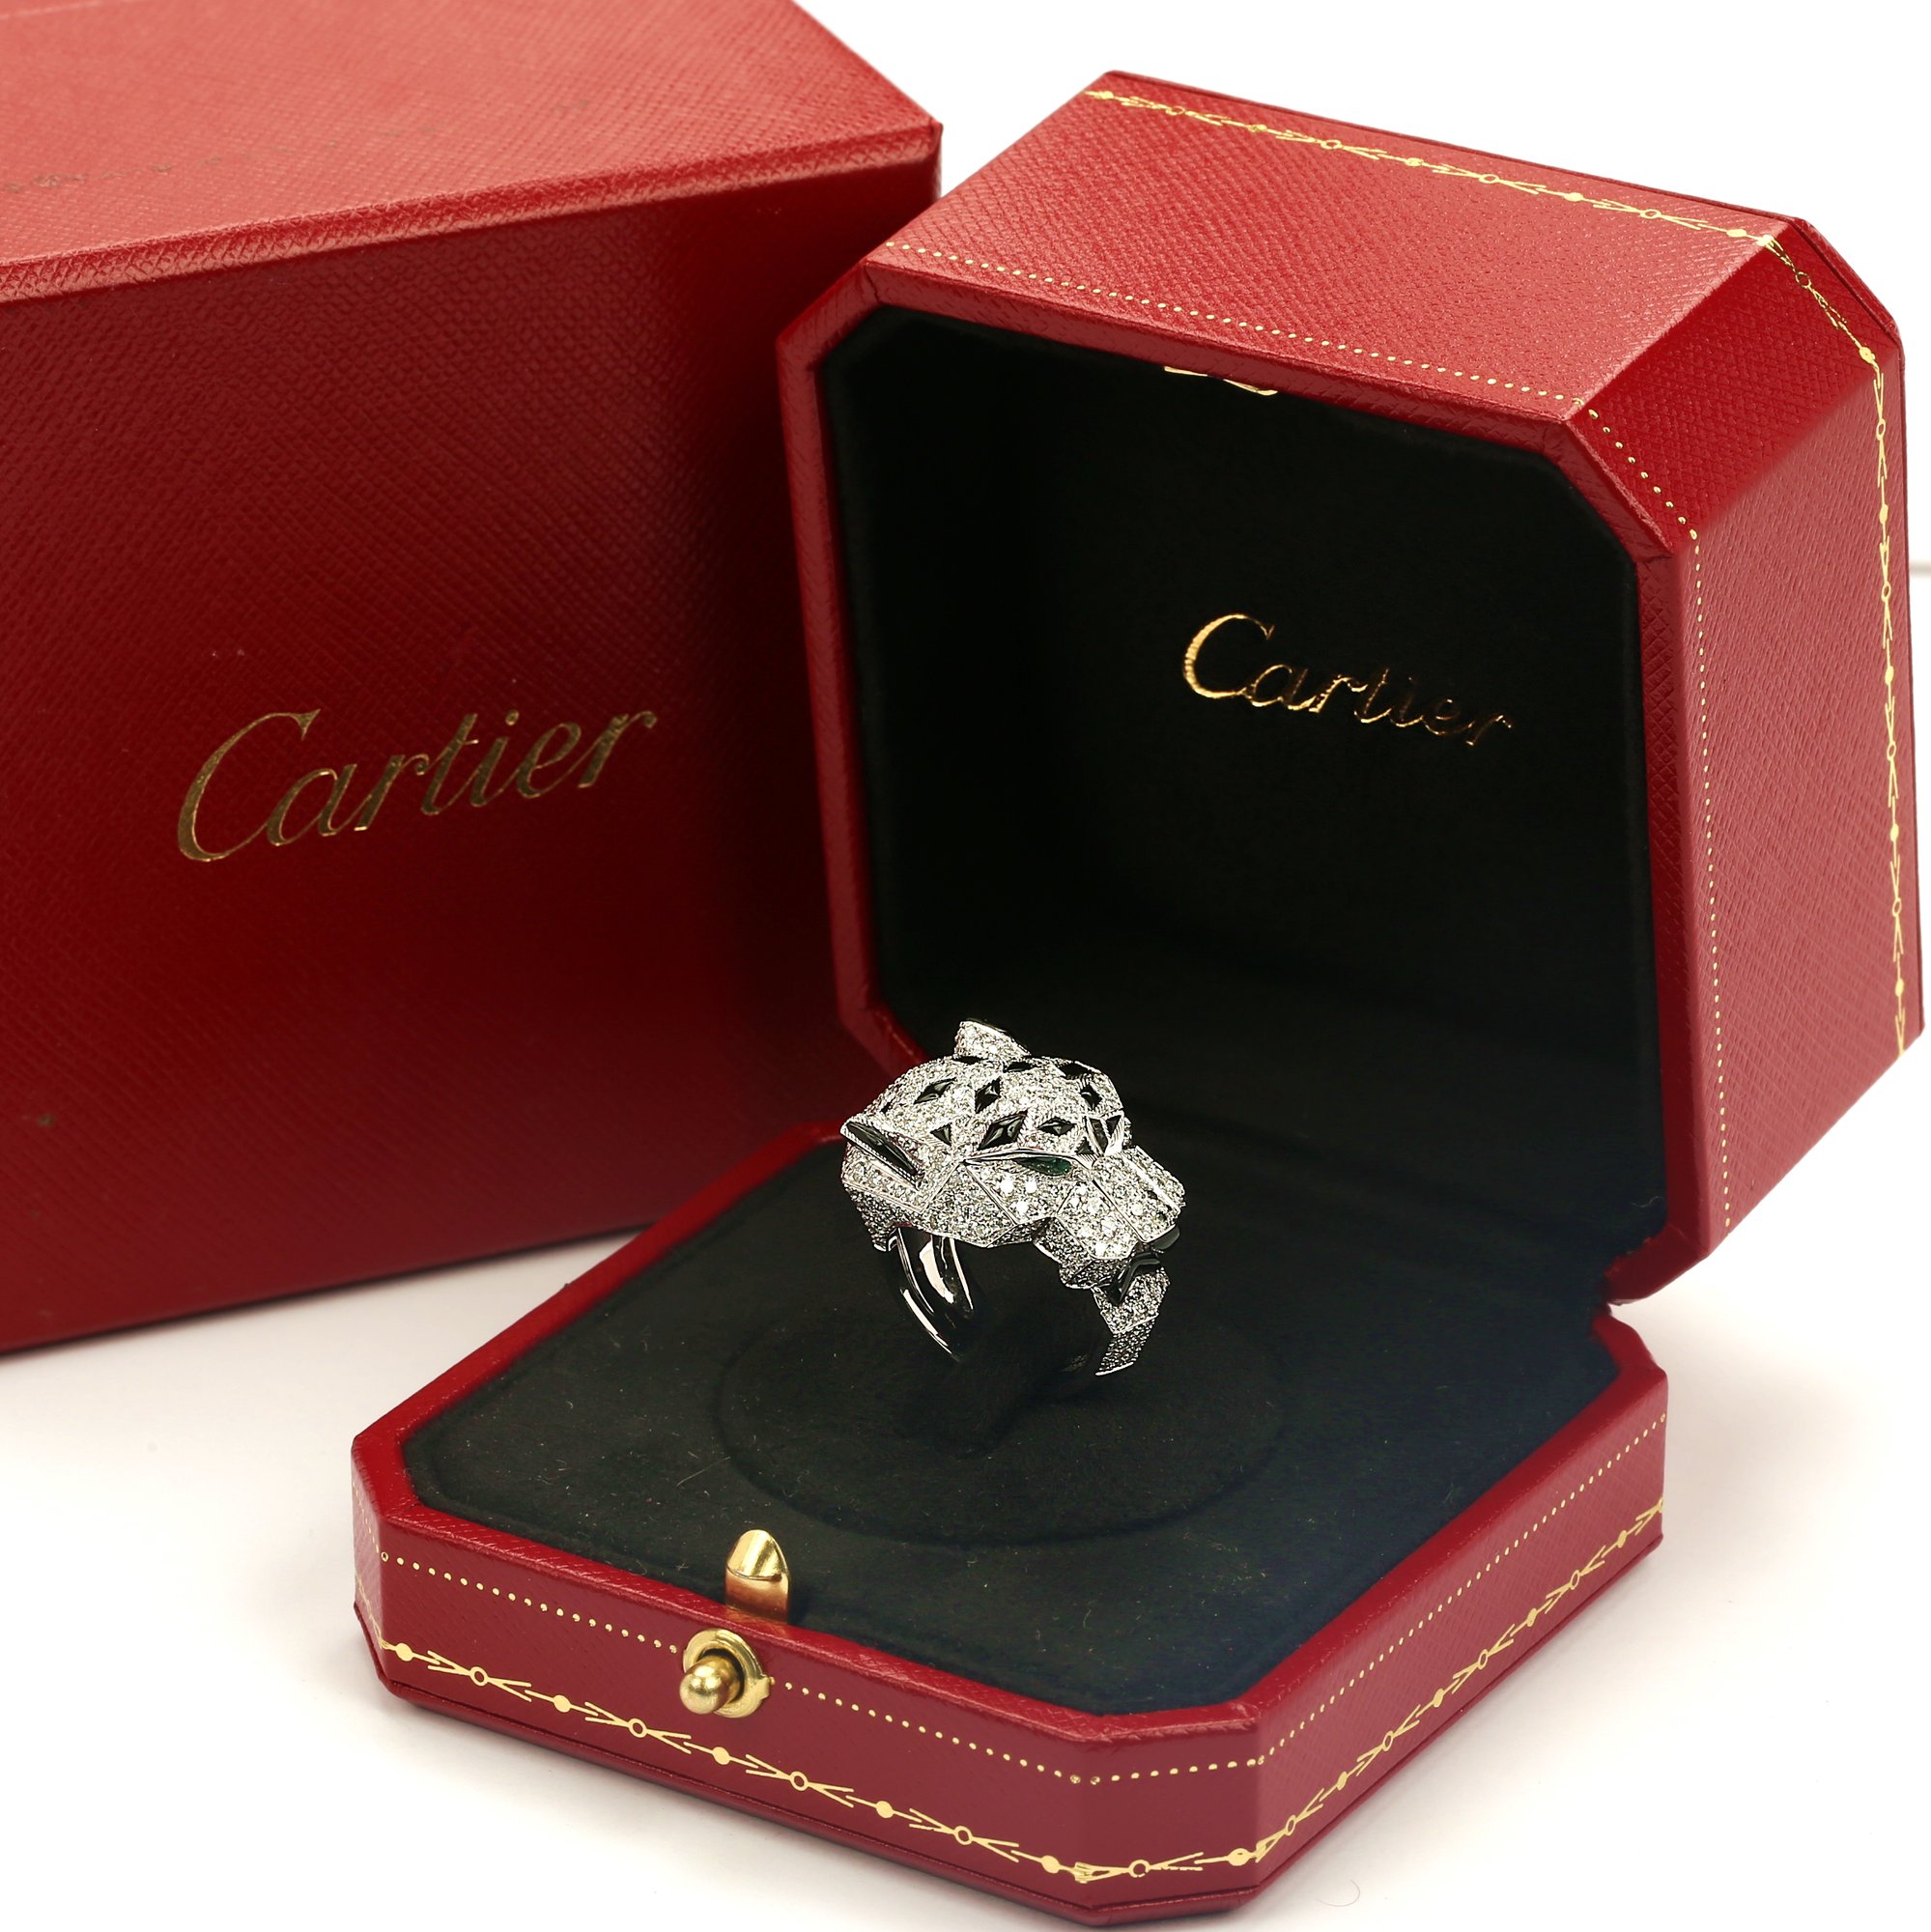 18k White Gold voller Diamant pflastern Onyx Smaragd Panthere de Cartier Ring N4211000